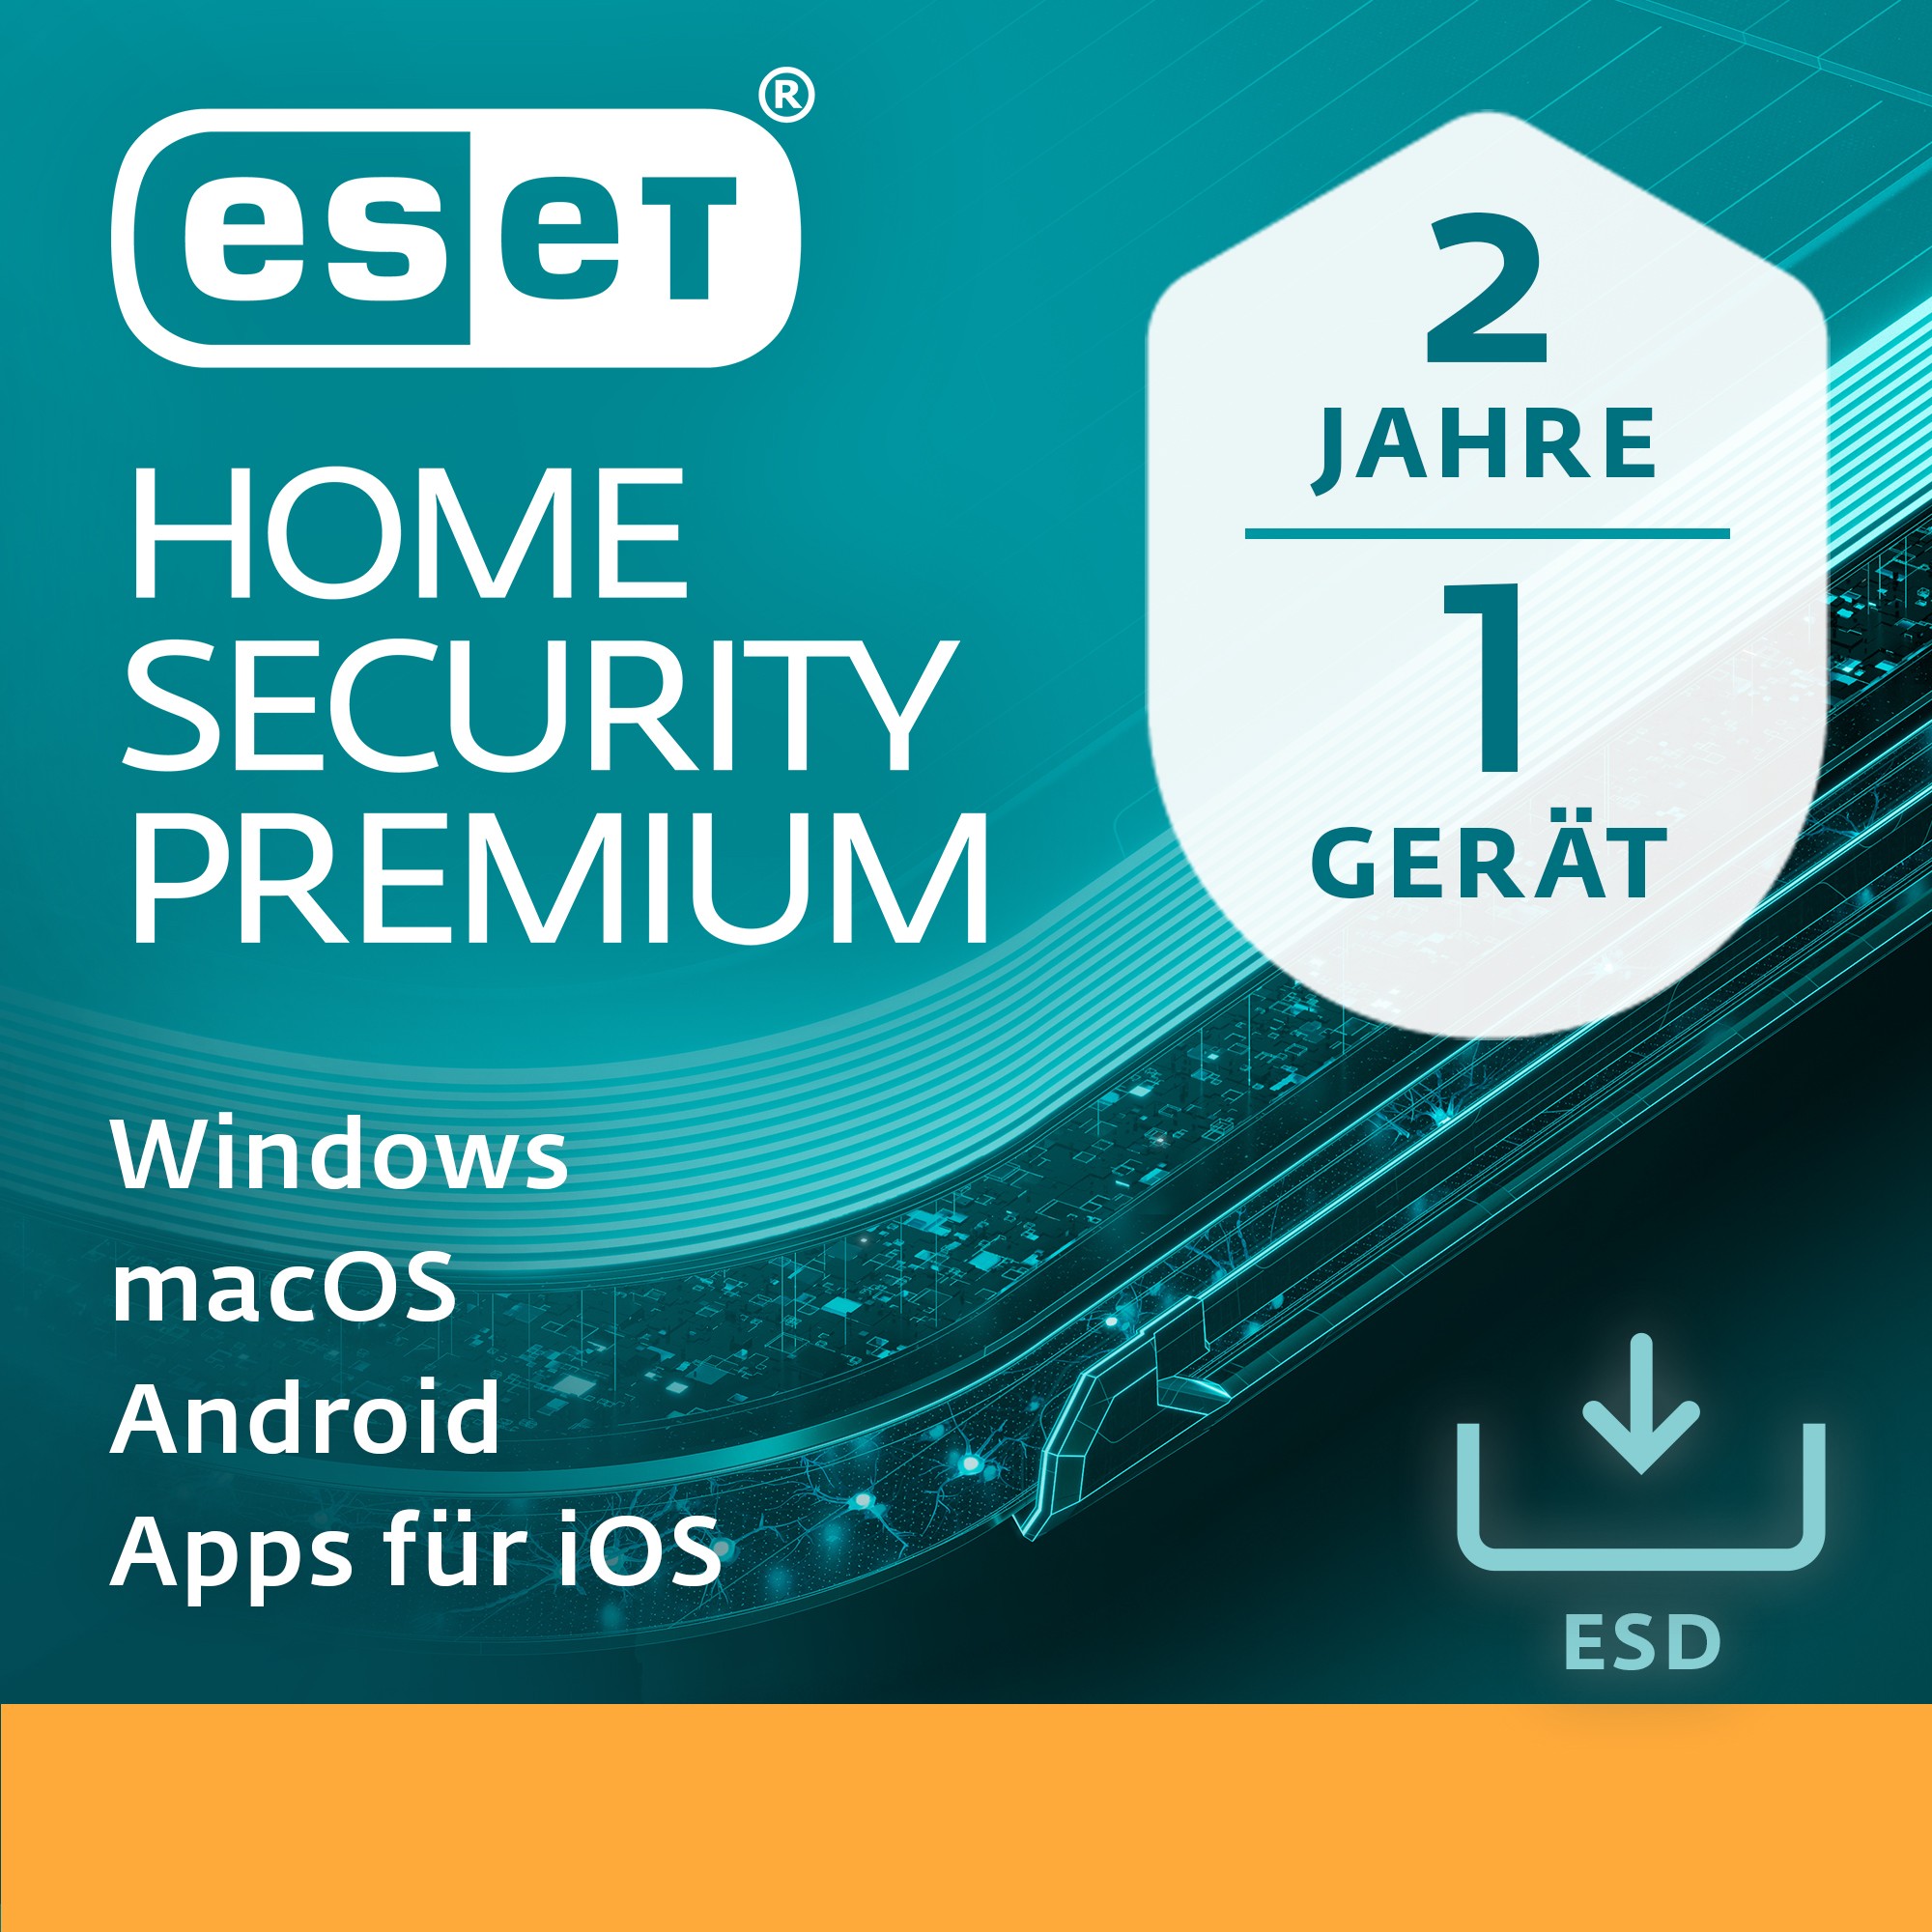 ESET Home Security Premium - 1 User. 2 Years - ESD-DownloadESD - EHSP-N2A1-VAKT-E